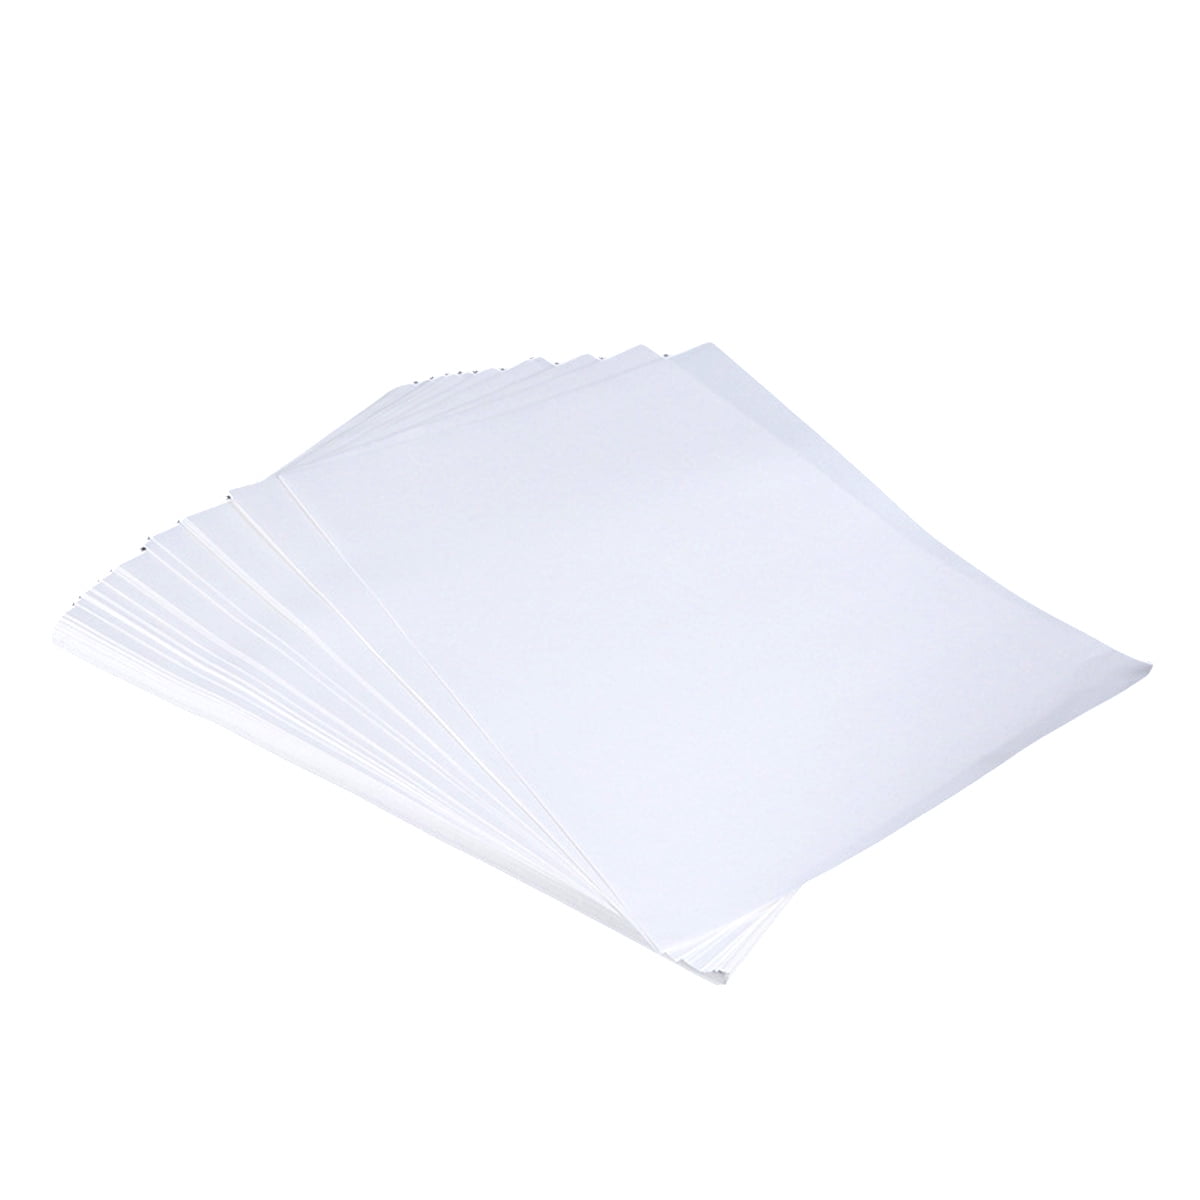 20Pcs Sublimation Transfer Paper A4 Paper Heat Thermal Transfer Printing Paper 